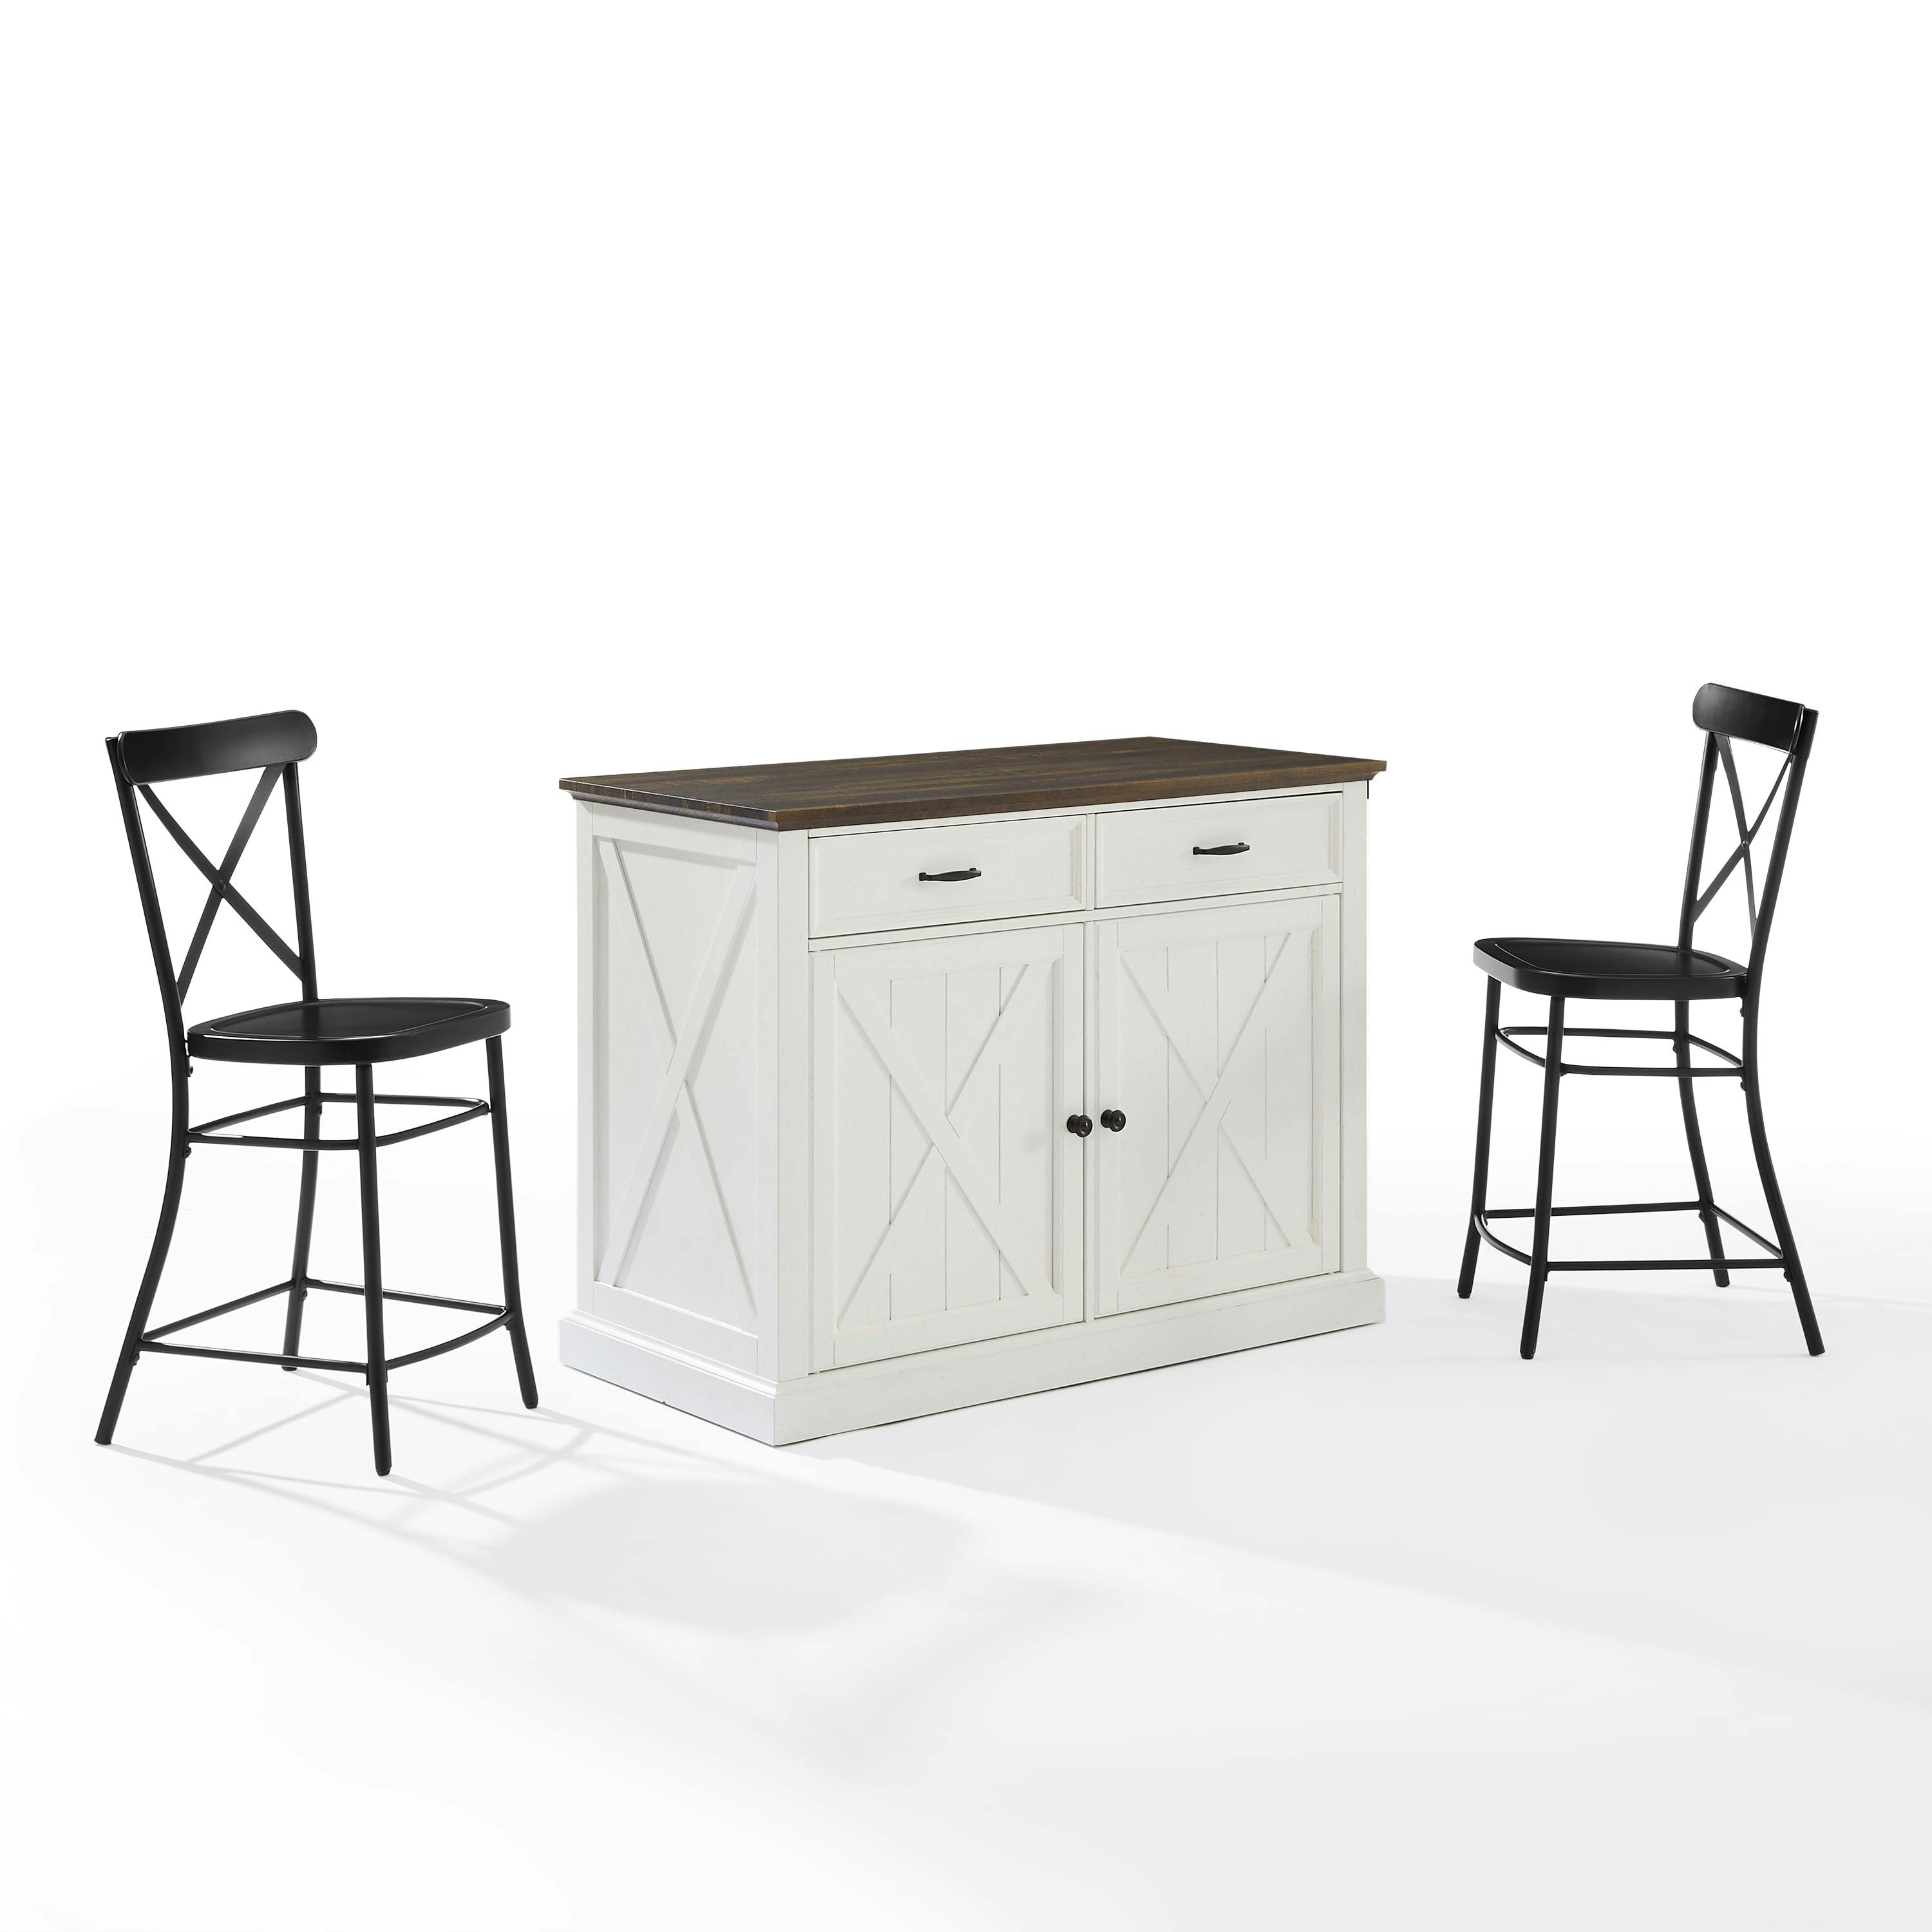 Clifton Distressed White and Black Modern Farmhouse Kitchen Island with Stools